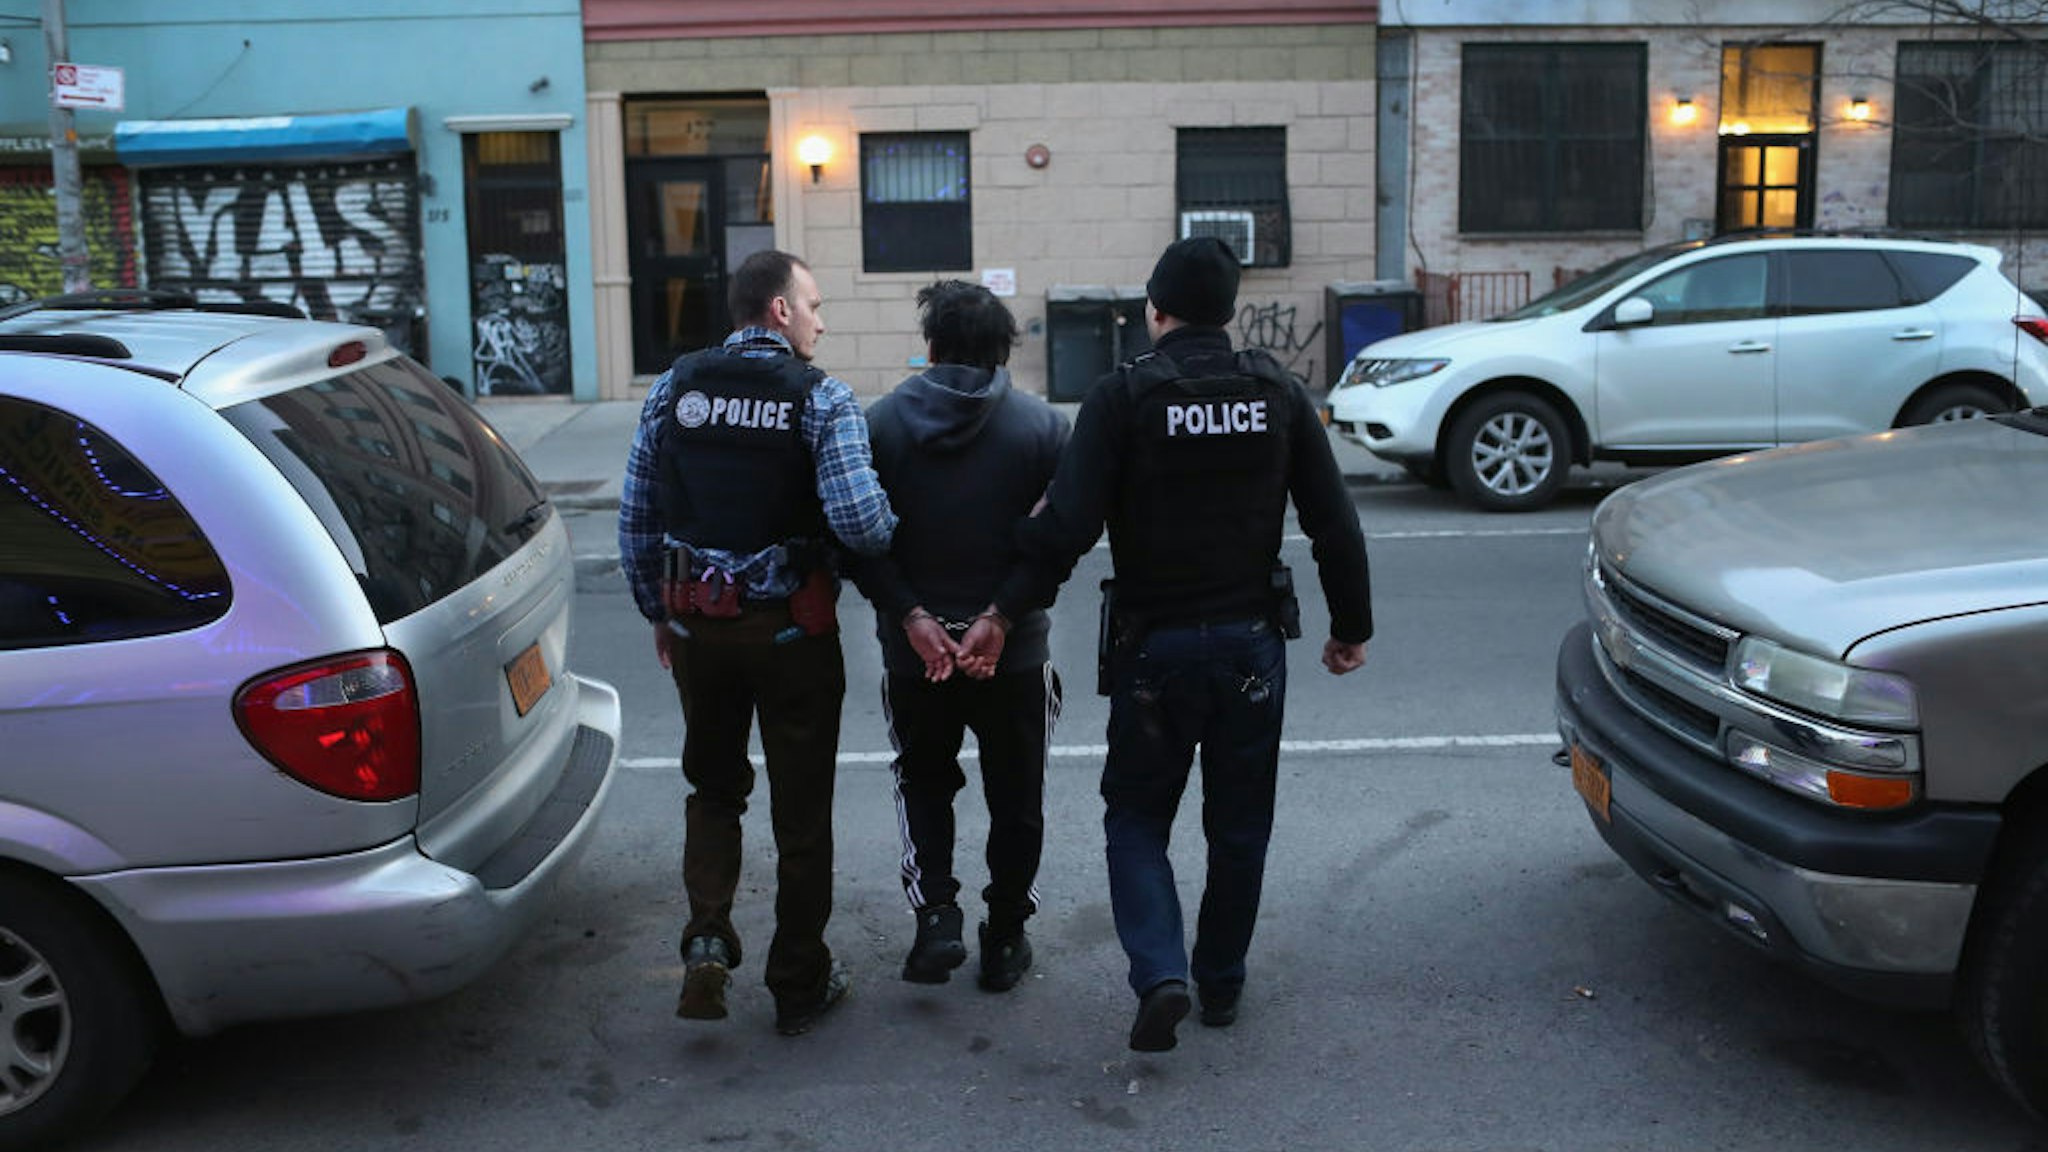 NEW YORK, NY - APRIL 11: U.S. Immigration and Customs Enforcement (ICE), officers arrest an undocumented Mexican immigrant during a raid in the Bushwick neighborhood of Brooklyn on April 11, 2018 in New York City. New York is considered a "sanctuary city" for undocumented immigrants, and ICE receives little or no cooperation from local law enforcement. ICE said that officers arrested 225 people for violation of immigration laws during the 6-day operation, the largest in New York City in recent years. (Photo by John Moore/Getty Images)